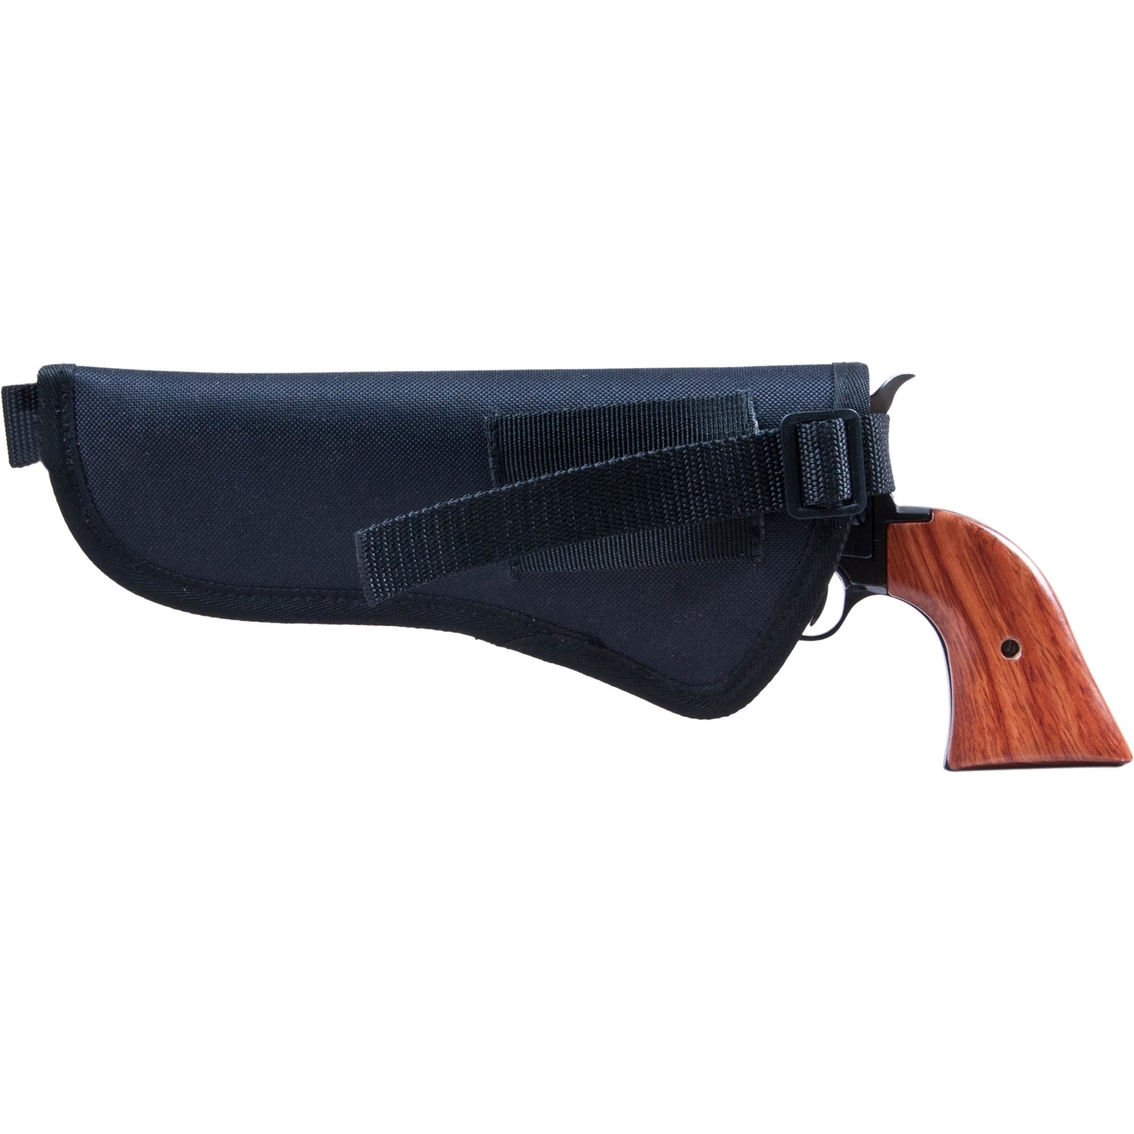 Heritage Rough Rider 22 LR 22 WMR 6.5 in. Barrel 6 Rds Revolver Blued with Holster - Image 4 of 4